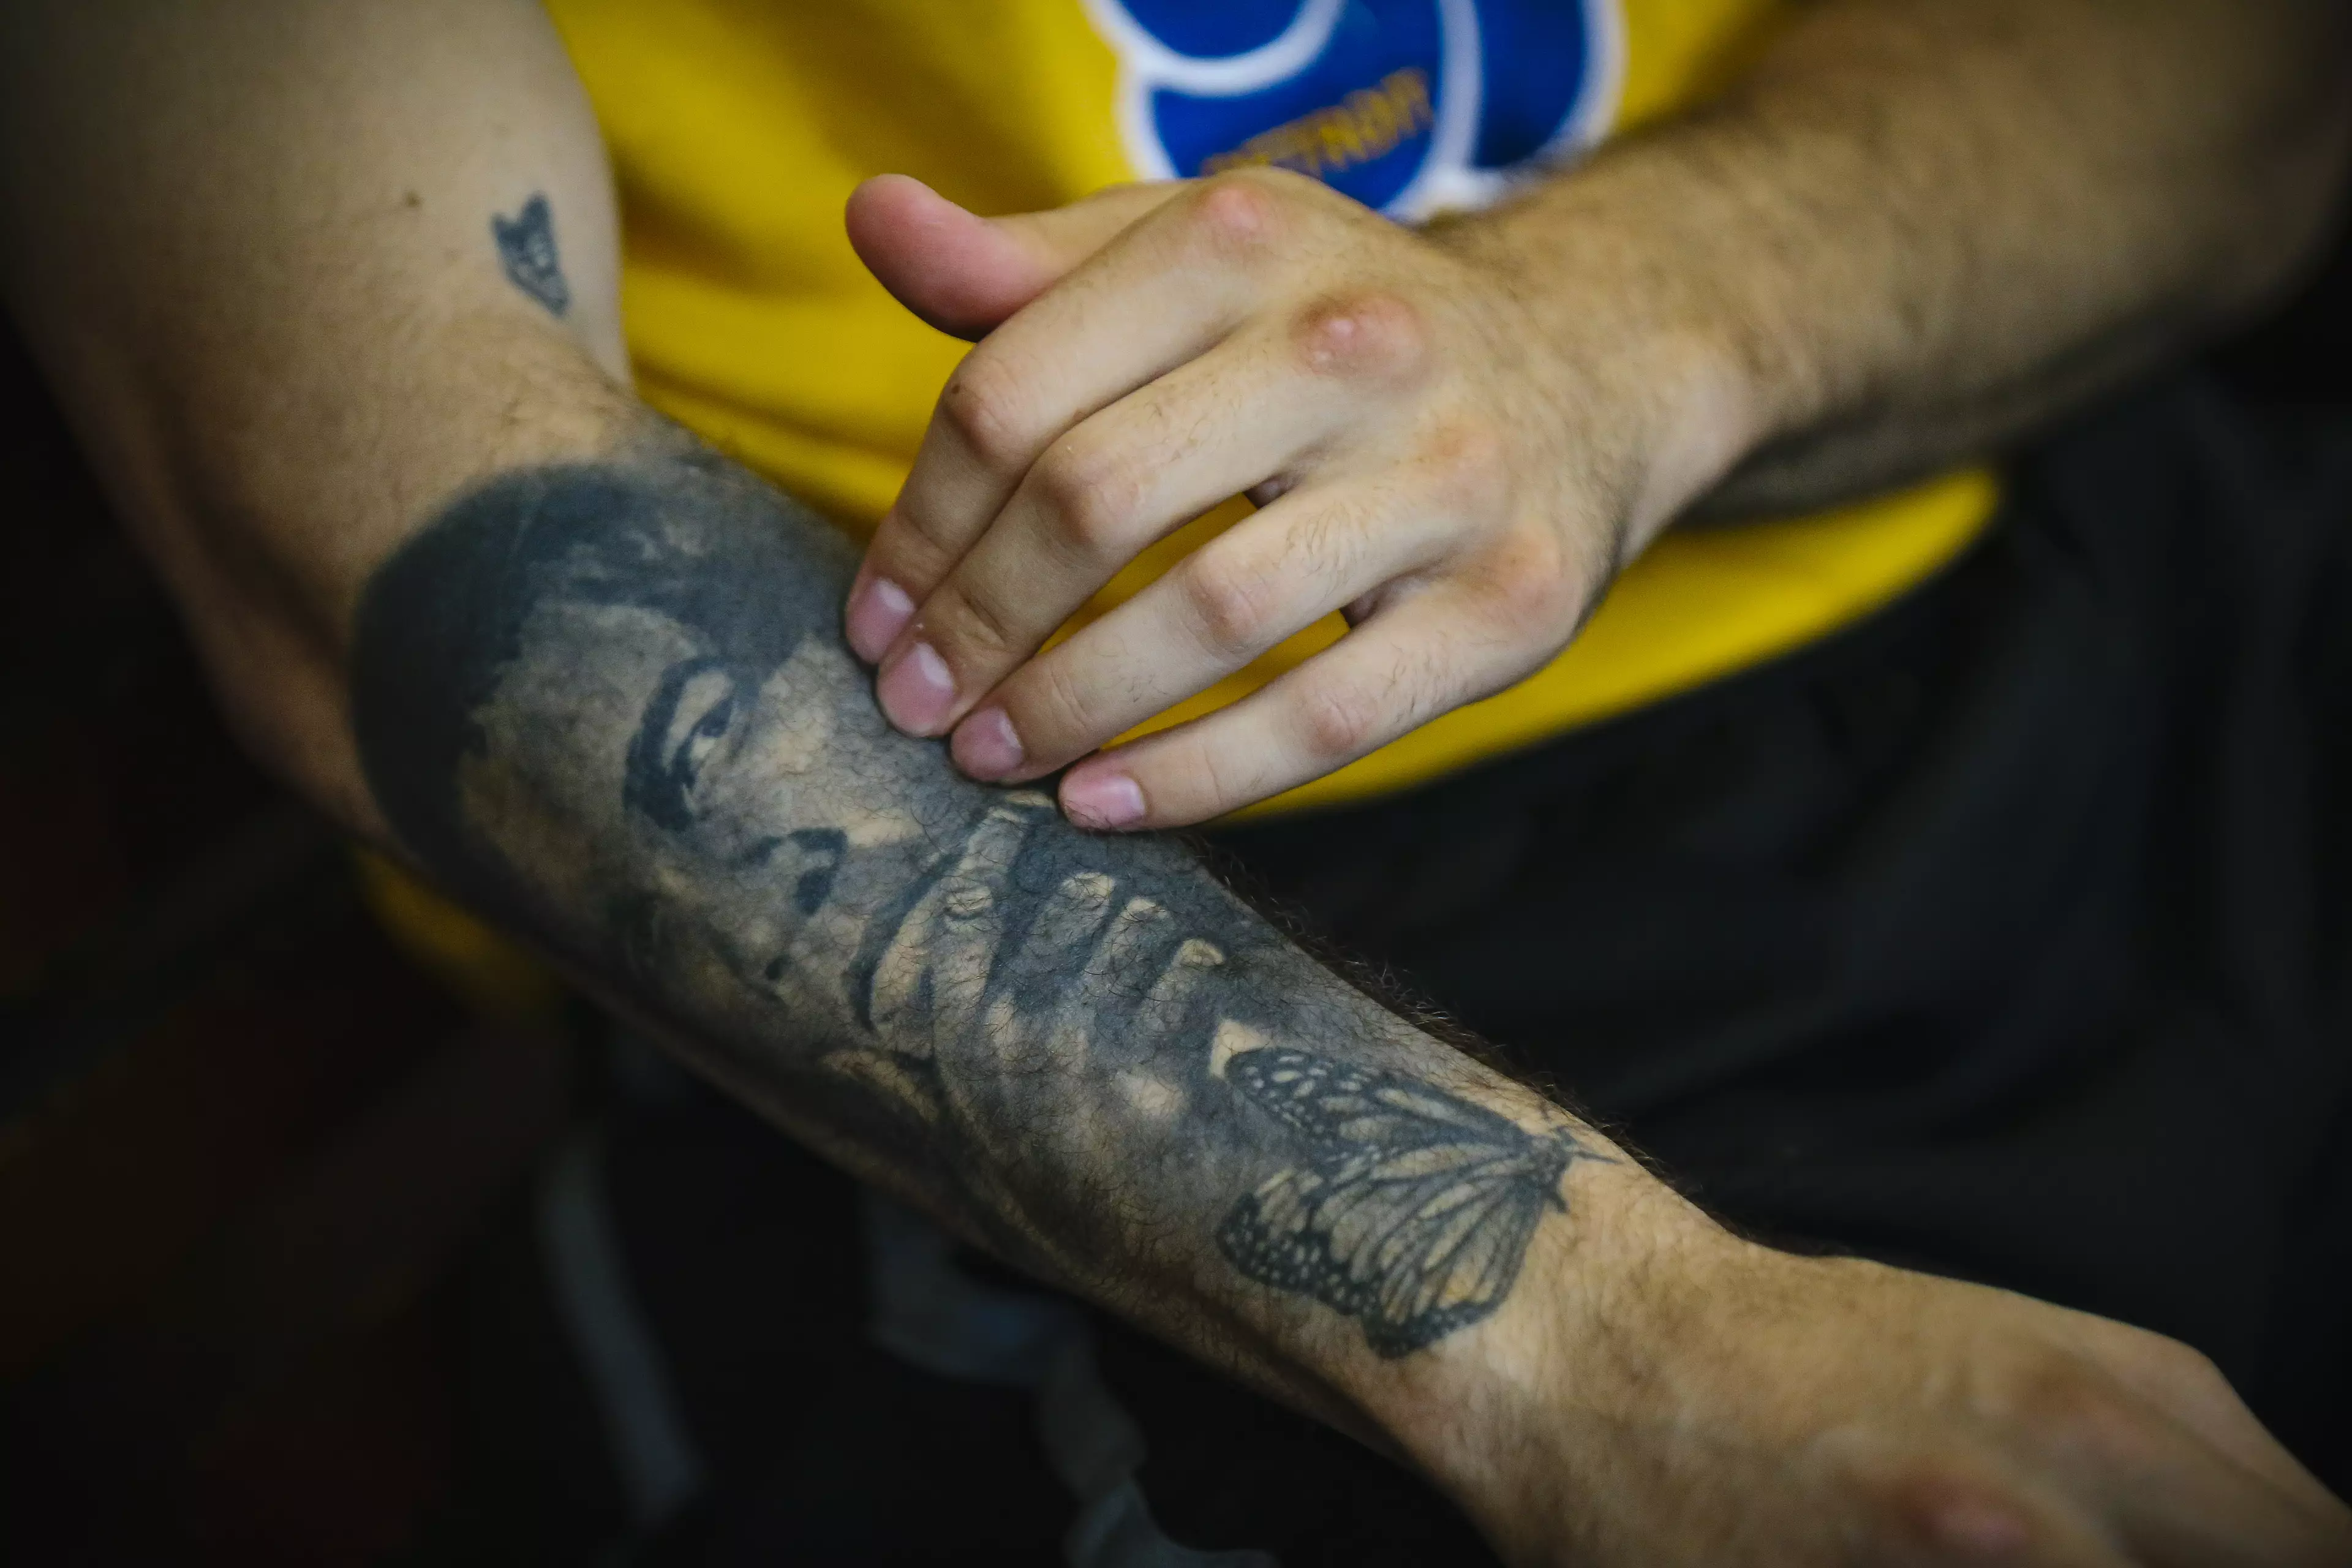 Nico Ali Walsh has a tattoo of his grandfather on his arm.